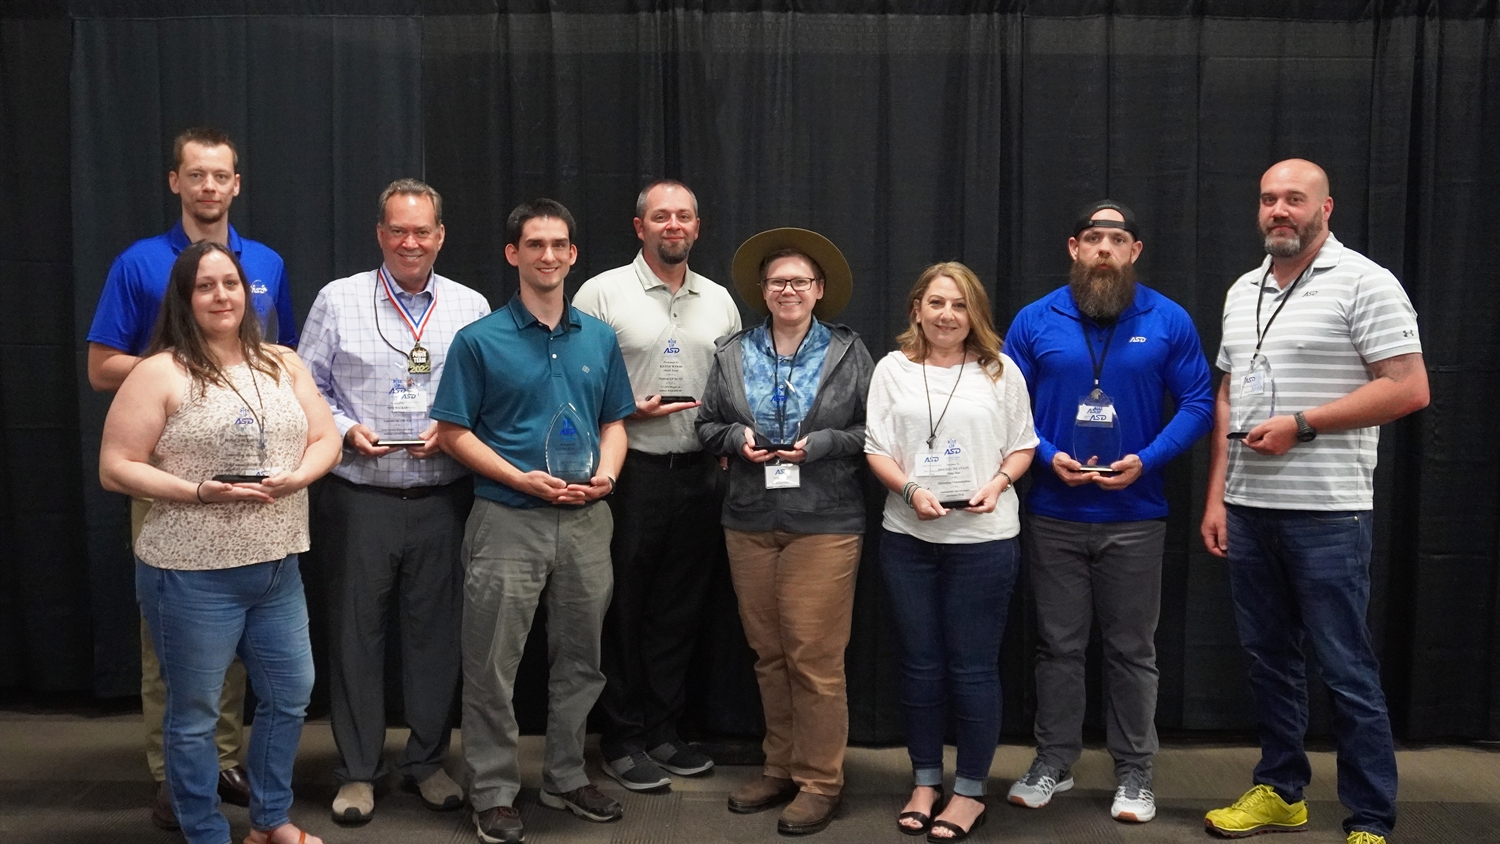 Top performers with their awards during the Operations Summer Summit. Great work team, we appreciate all that you do!